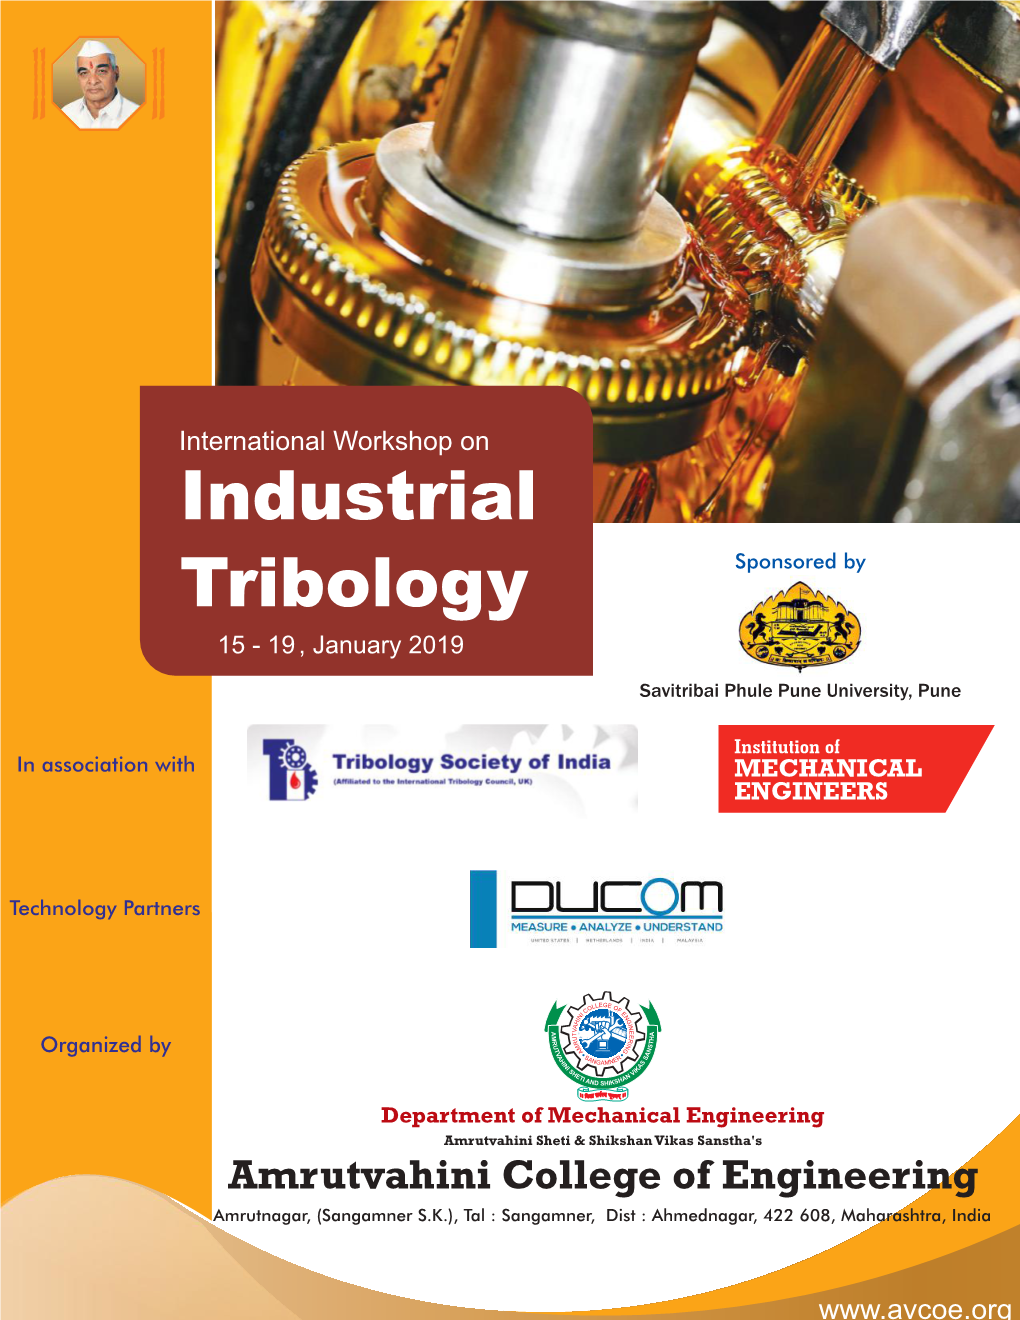 Industrial Tribology